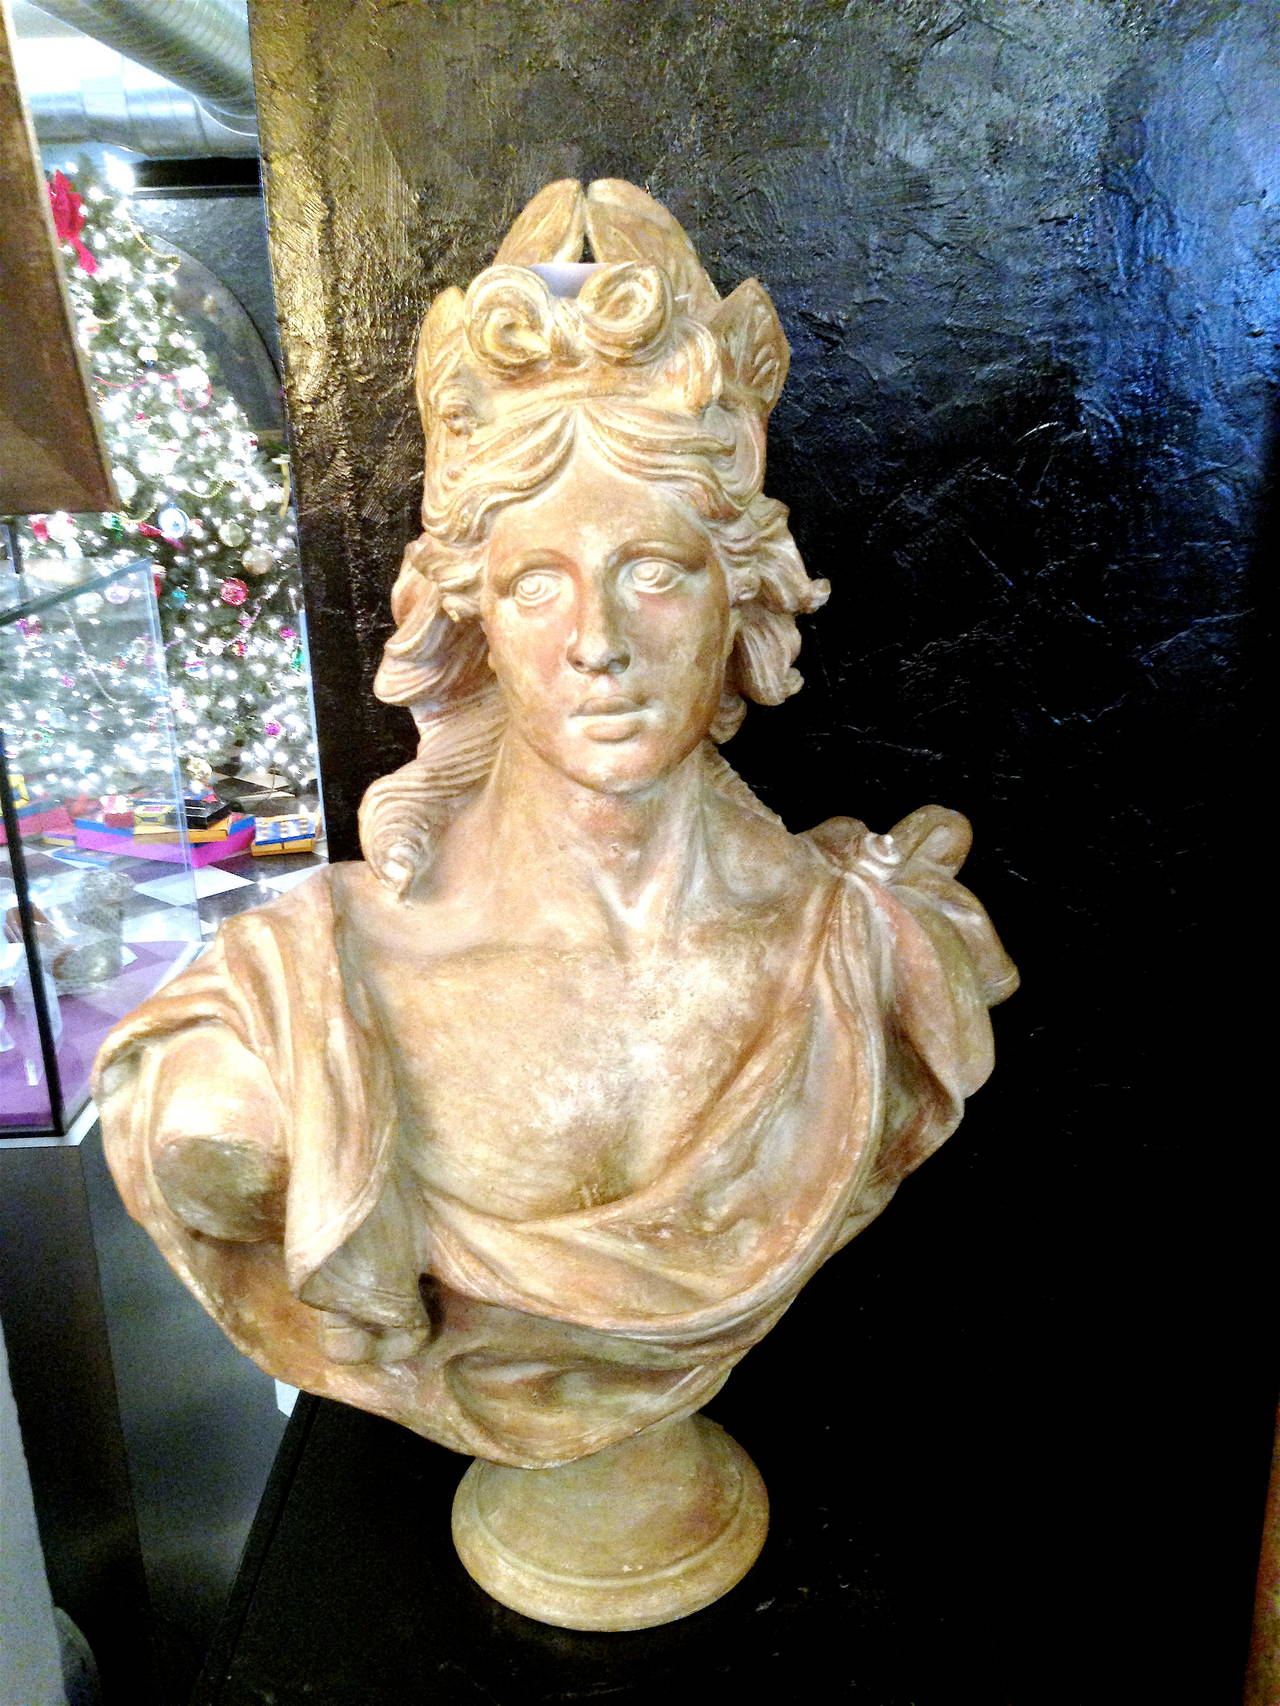 Stately Continental Terracotta Bust Depicting A Classical Female Bust.  
Depicting a classical female bust with laurel leaves around the head, the second being a woman. Very good-looking with lovely patina.  We also have other classical bust.  Feel